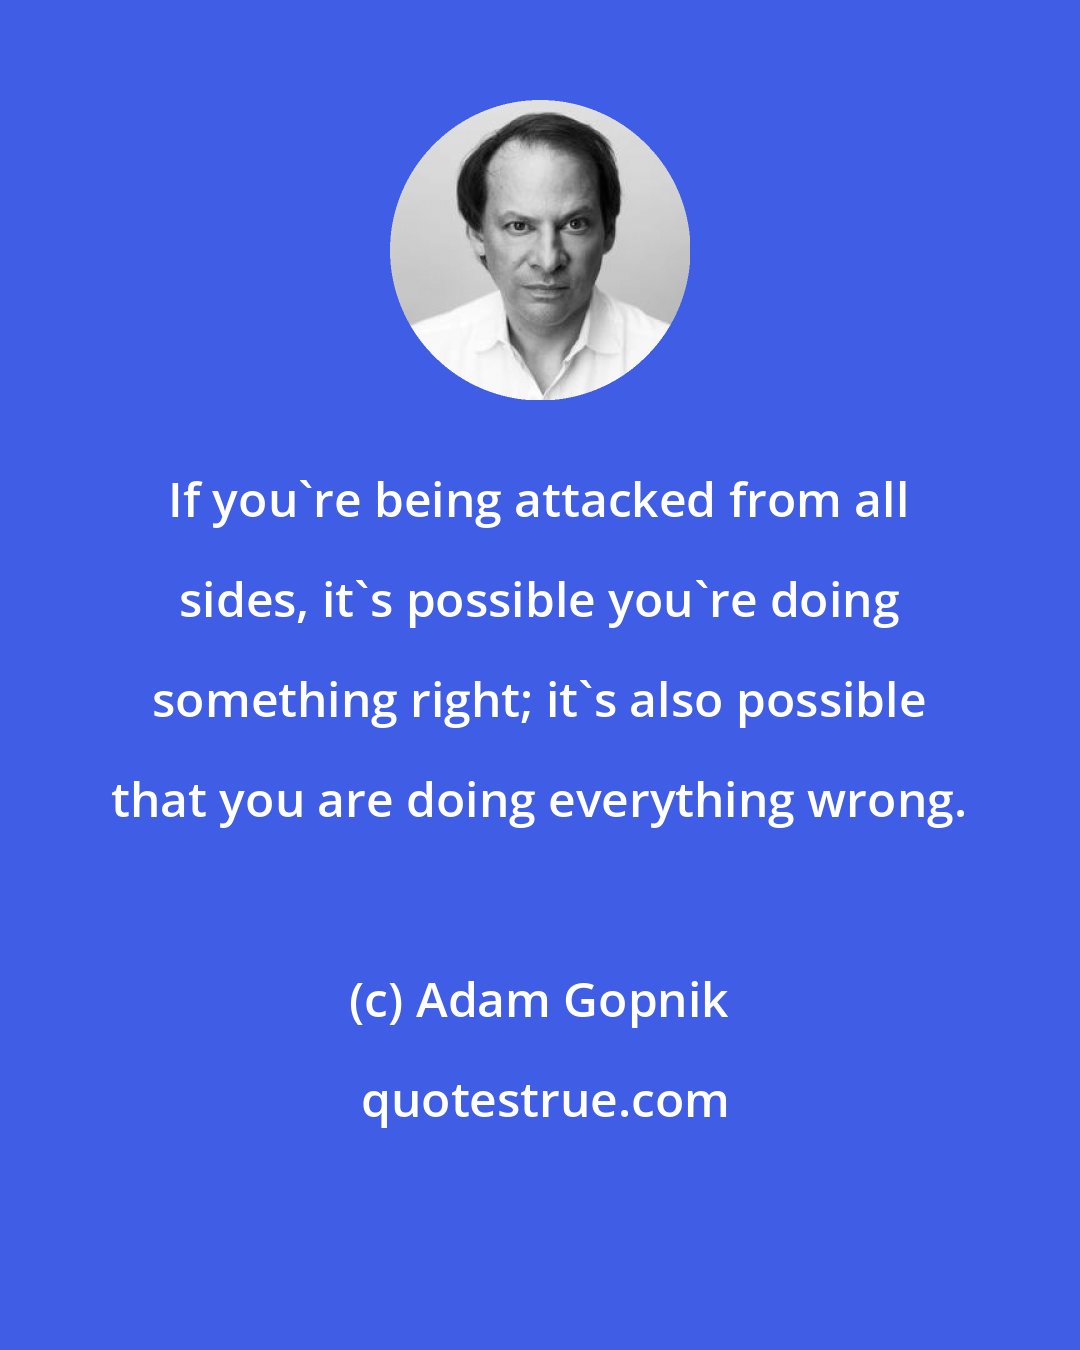 Adam Gopnik: If you're being attacked from all sides, it's possible you're doing something right; it's also possible that you are doing everything wrong.